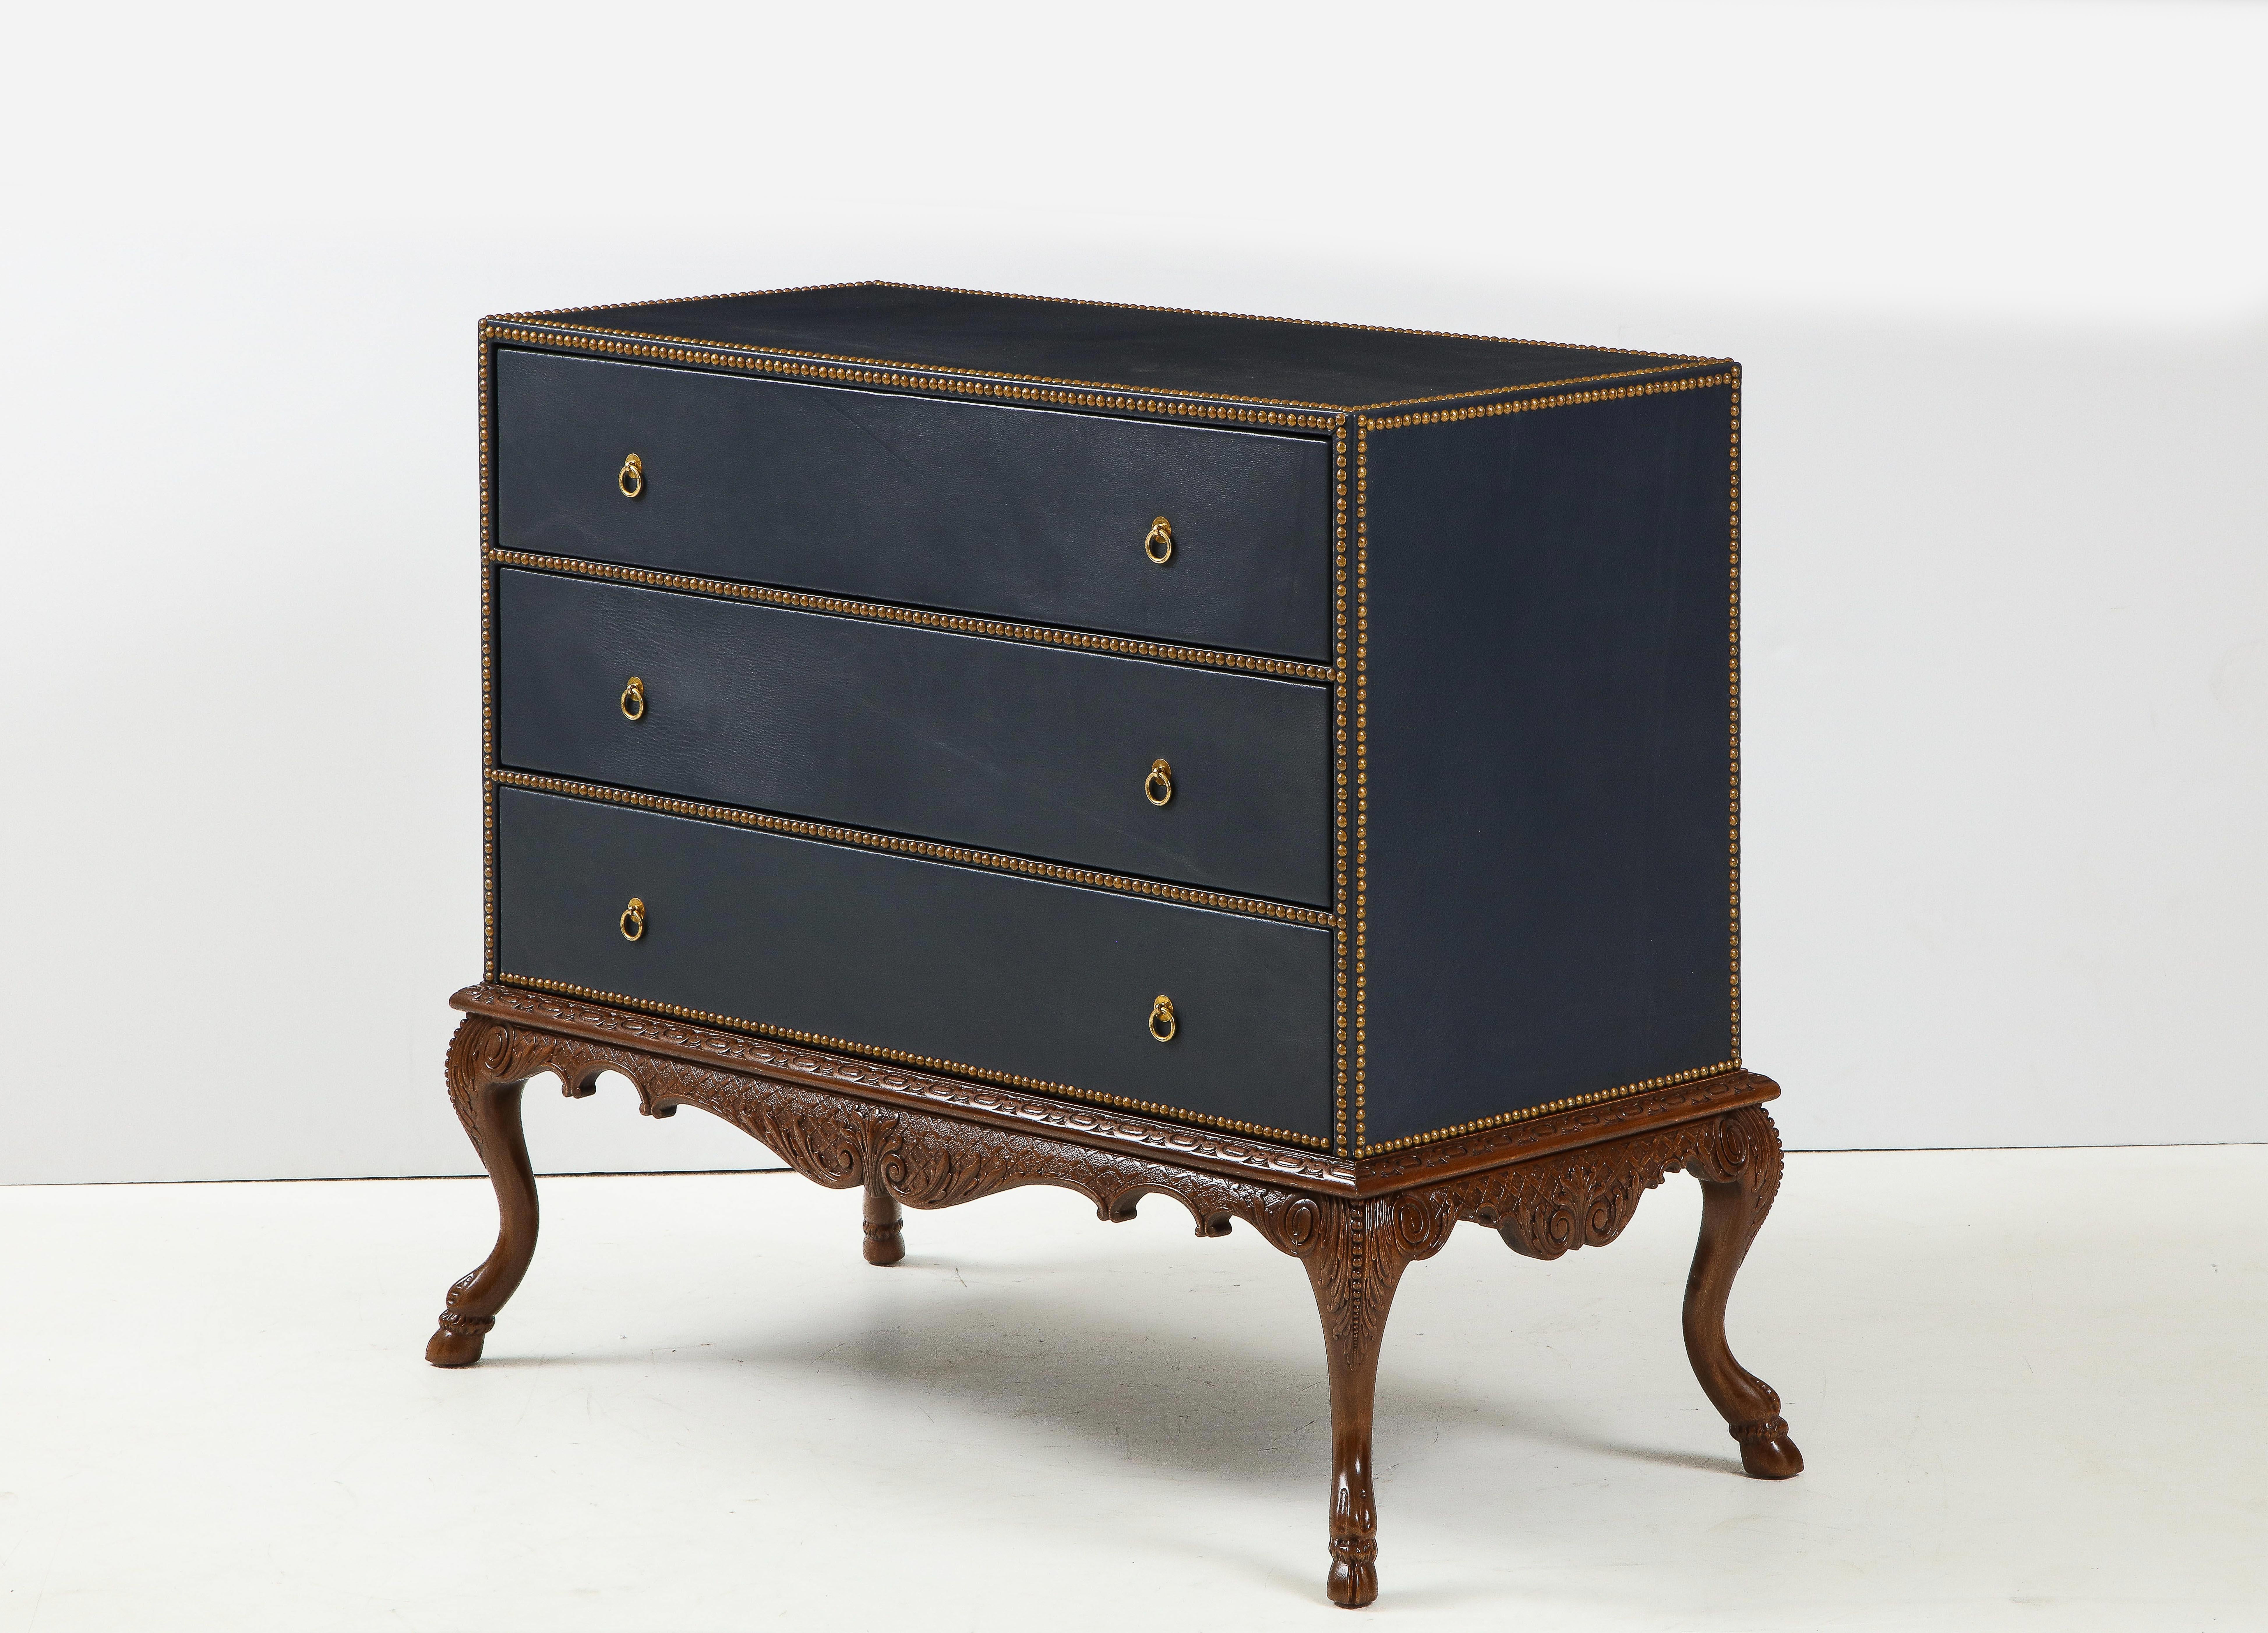 Bespoke three drawer chest covered in petrol blue leather with hand hammered brass nailheads. Chest rests on hand carved stand with cloven feet and intricate front and side aprons, the 3 deep drawers provide ample storage. Covered back allows piece